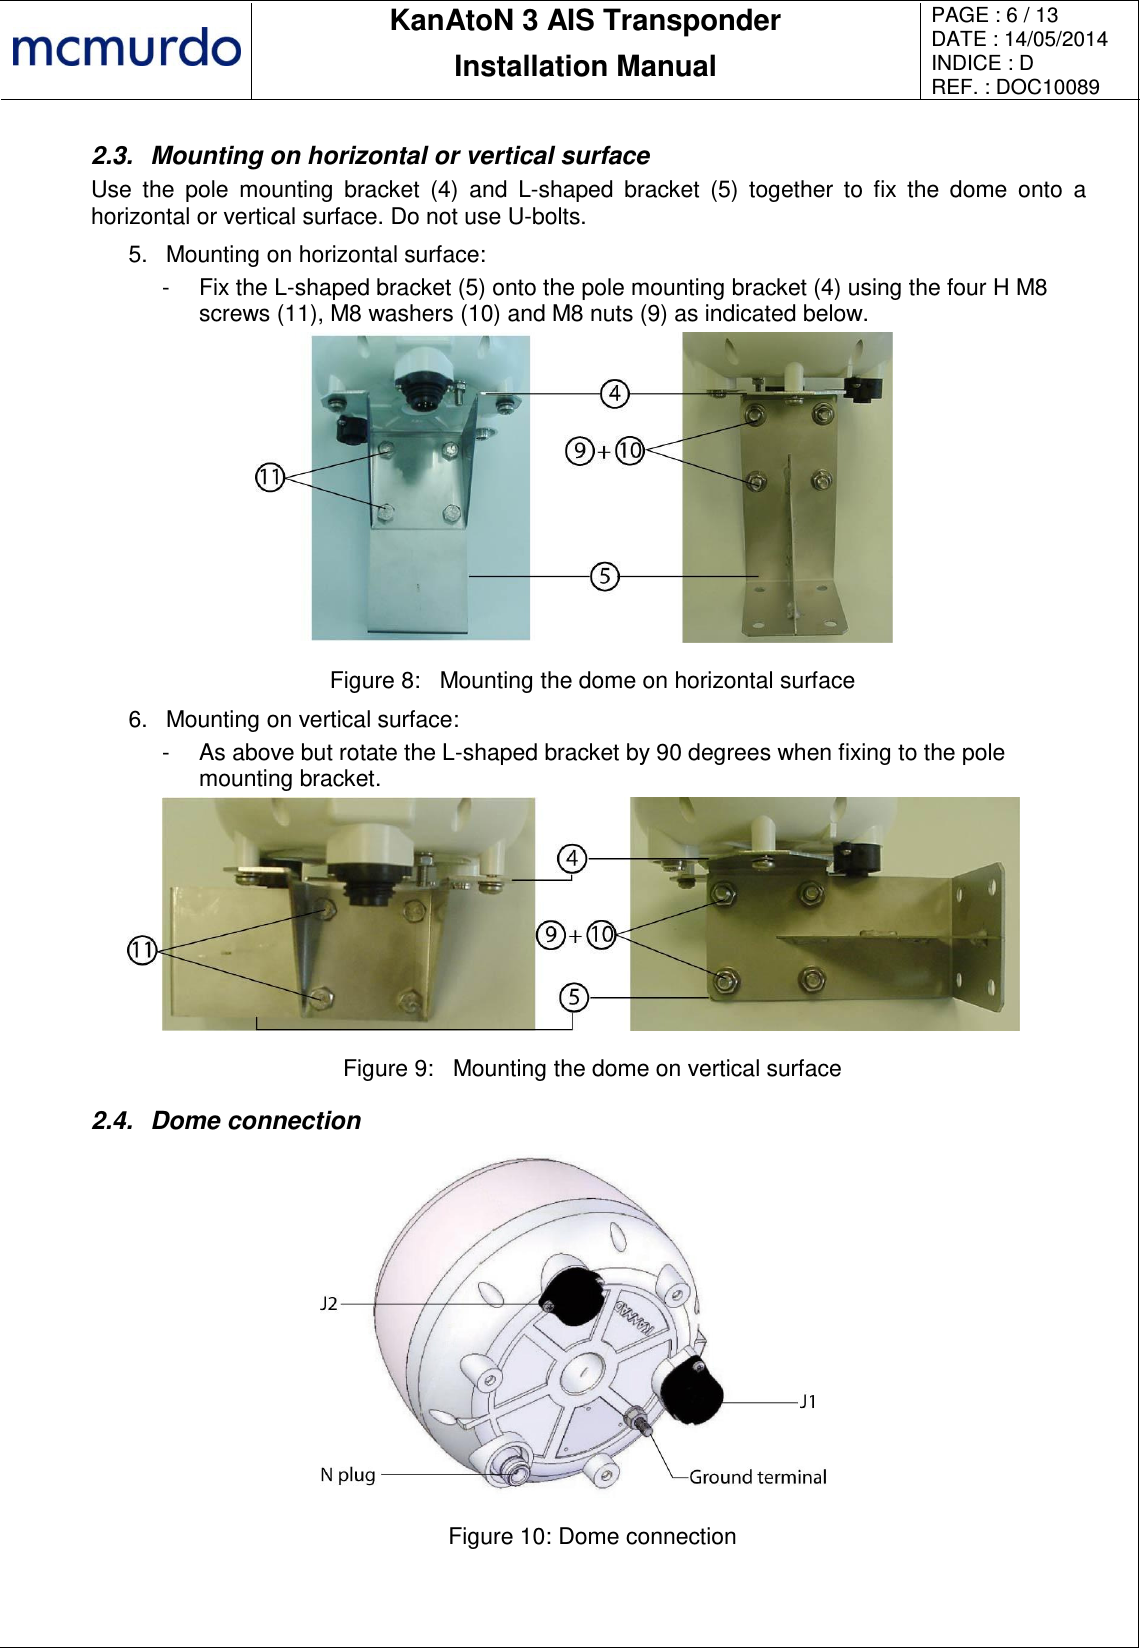       KanAtoN 3 AIS Transponder Installation Manual PAGE : 6 / 13 DATE : 14/05/2014 INDICE : D REF. : DOC10089   2.3.  Mounting on horizontal or vertical surface Use  the  pole  mounting  bracket  (4)  and  L-shaped  bracket  (5)  together  to  fix  the  dome  onto  a horizontal or vertical surface. Do not use U-bolts. 5.  Mounting on horizontal surface: -  Fix the L-shaped bracket (5) onto the pole mounting bracket (4) using the four H M8 screws (11), M8 washers (10) and M8 nuts (9) as indicated below.  Figure 8:  Mounting the dome on horizontal surface 6.  Mounting on vertical surface: -  As above but rotate the L-shaped bracket by 90 degrees when fixing to the pole mounting bracket.  Figure 9:  Mounting the dome on vertical surface 2.4.  Dome connection  Figure 10: Dome connection  